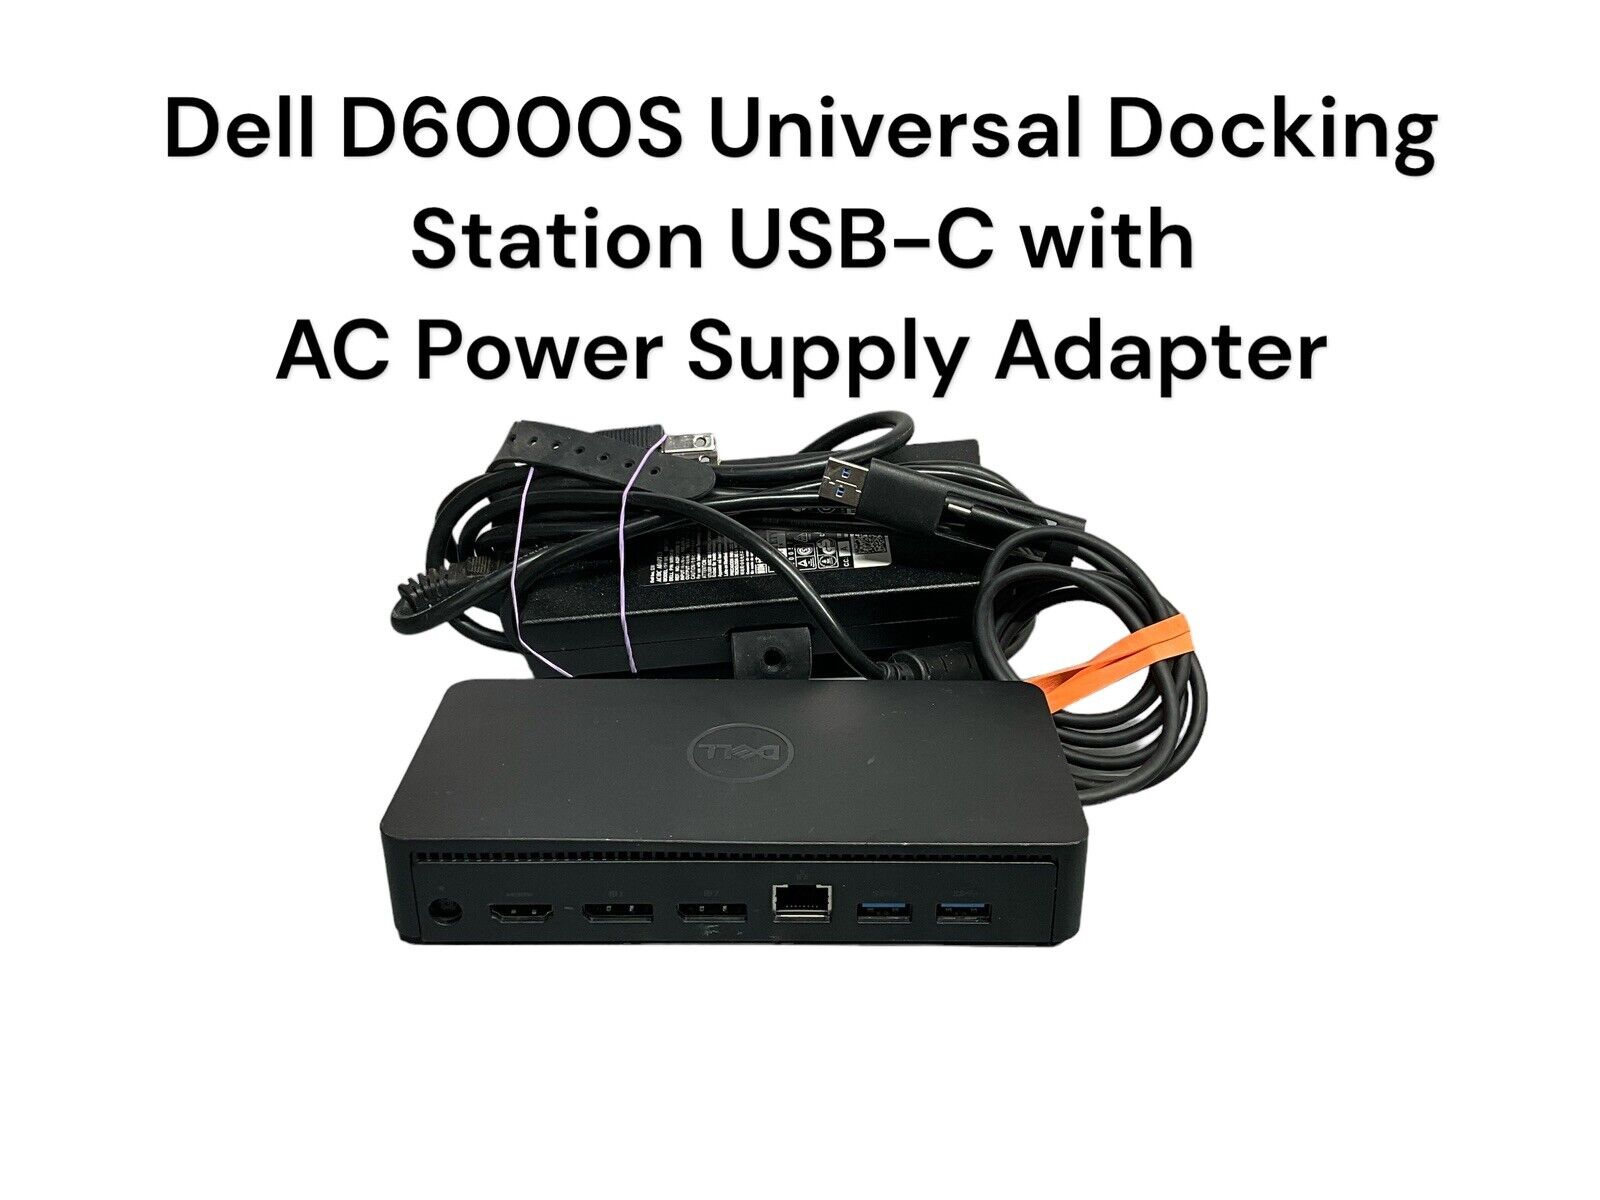 Dell D6000S Universal Docking Station USB-C with AC Power Supply Adapter